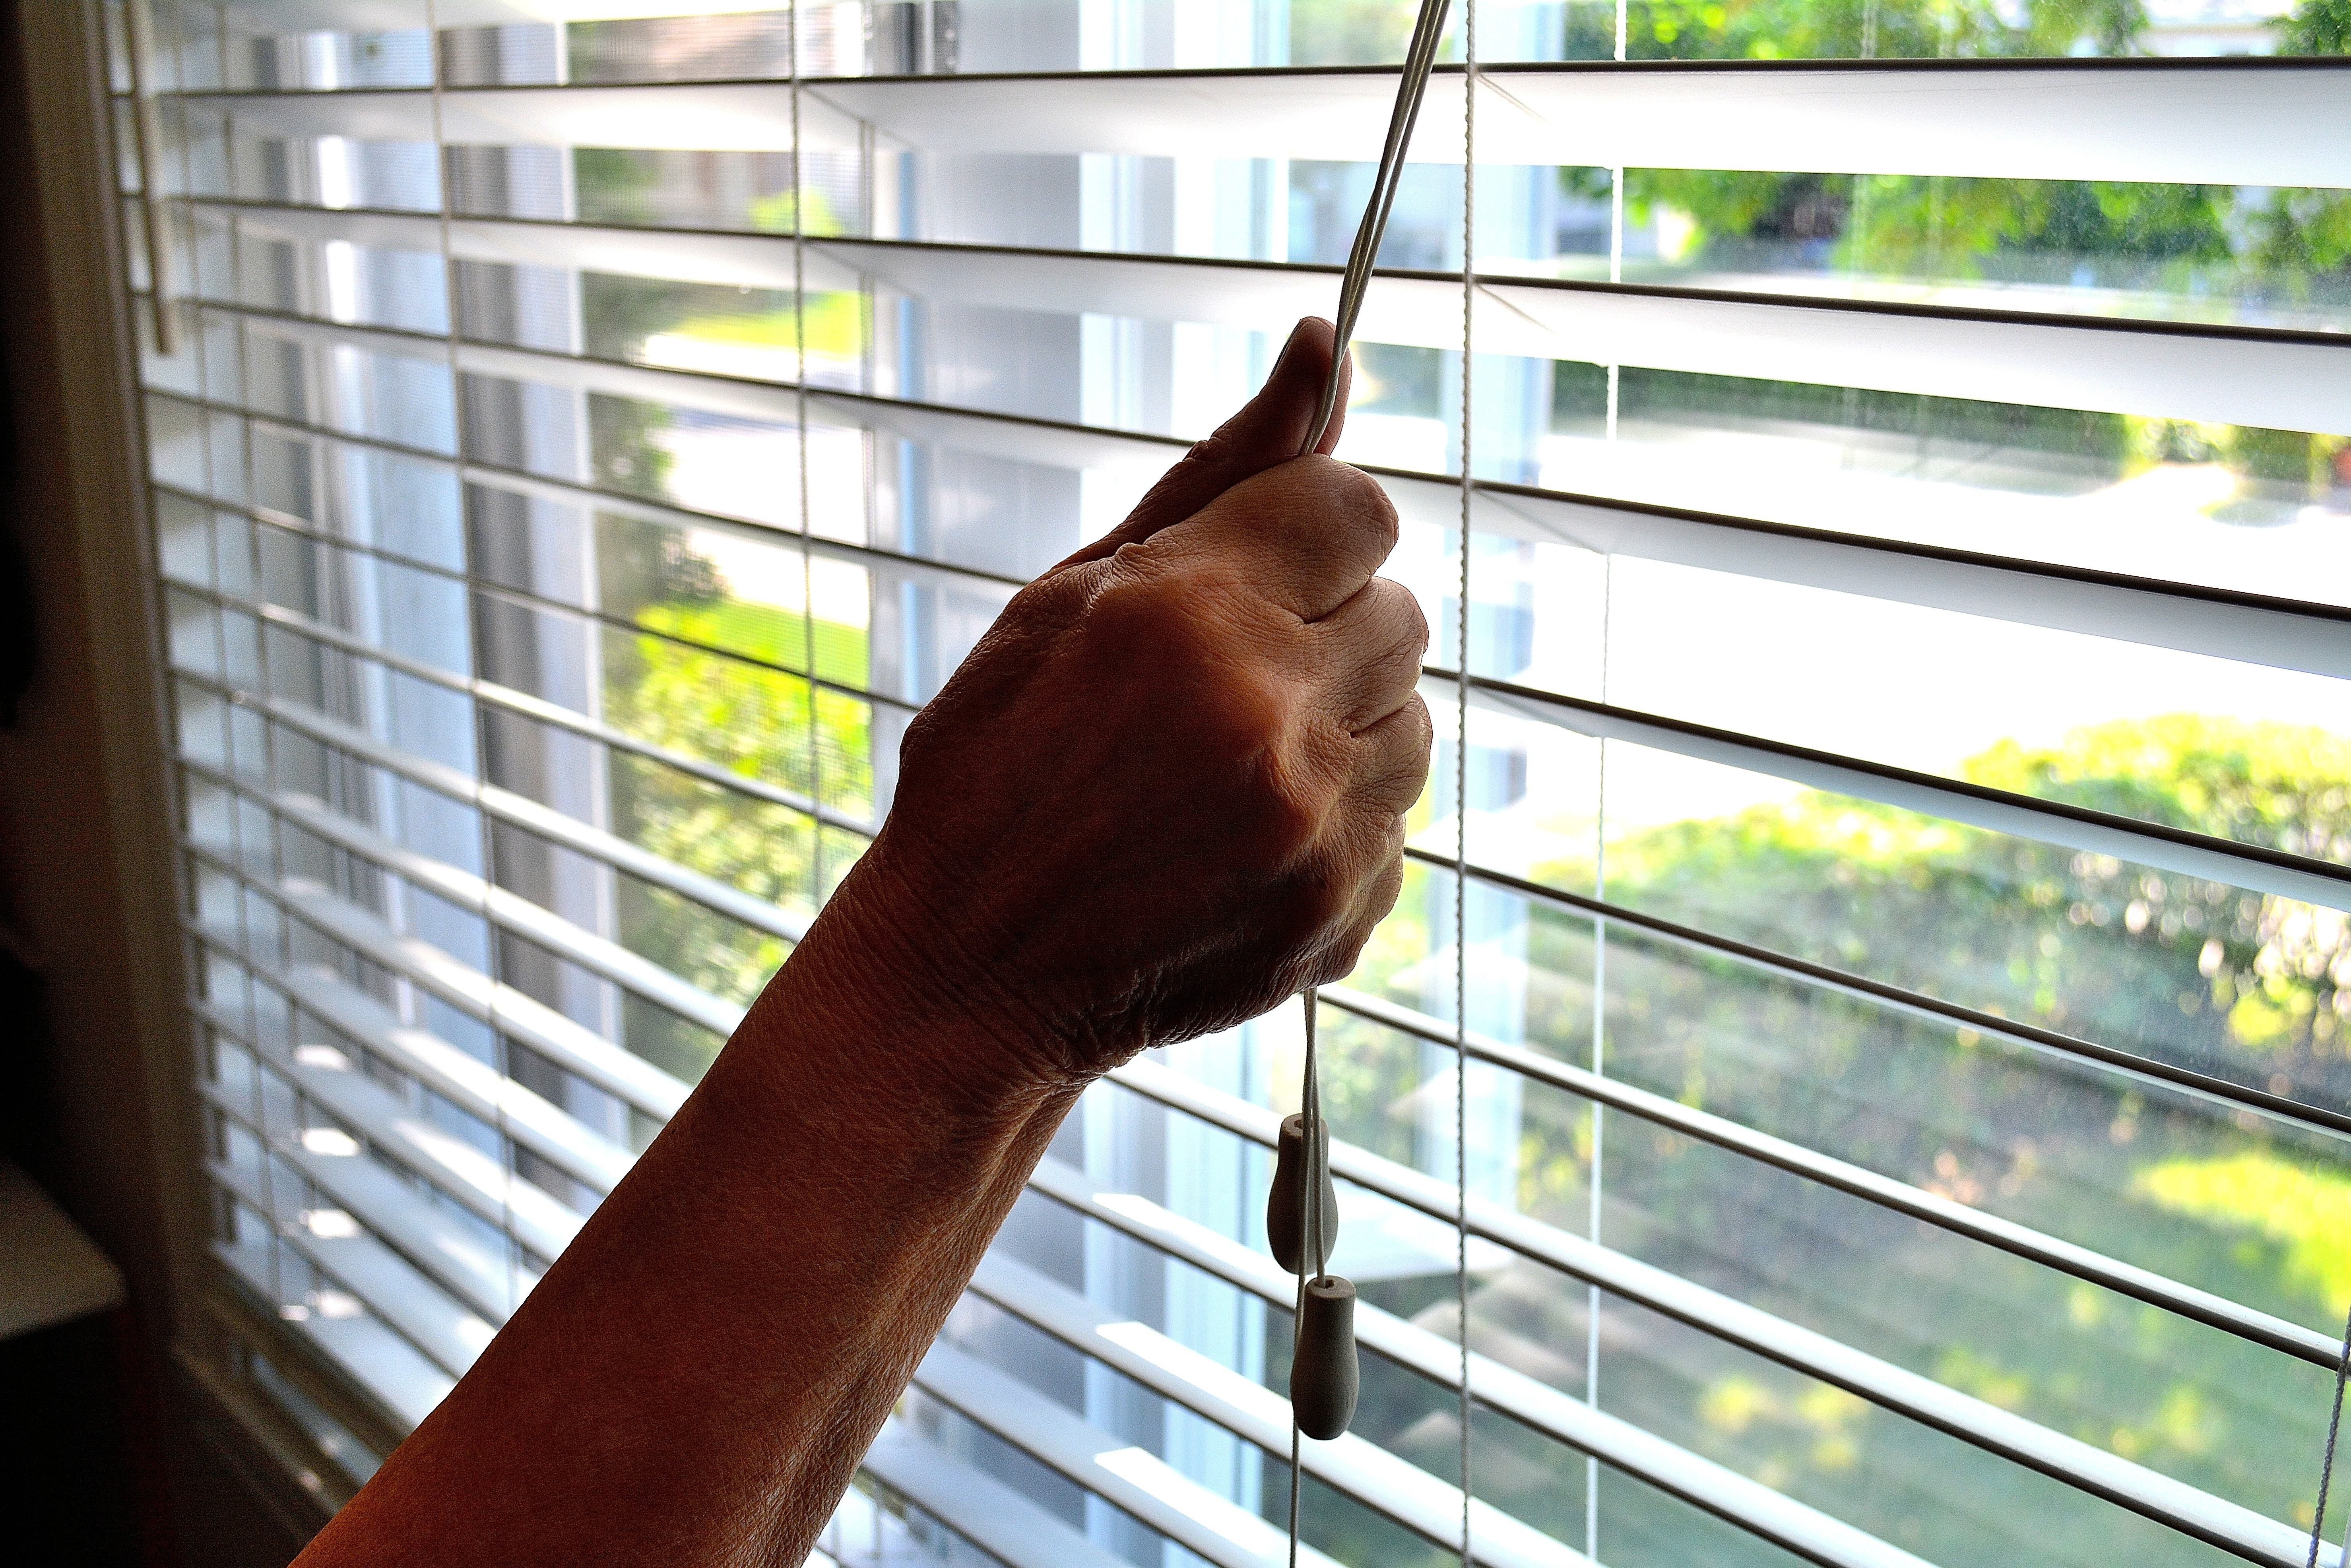 How To Get Blinds Down How to Lower Blinds | Hunker